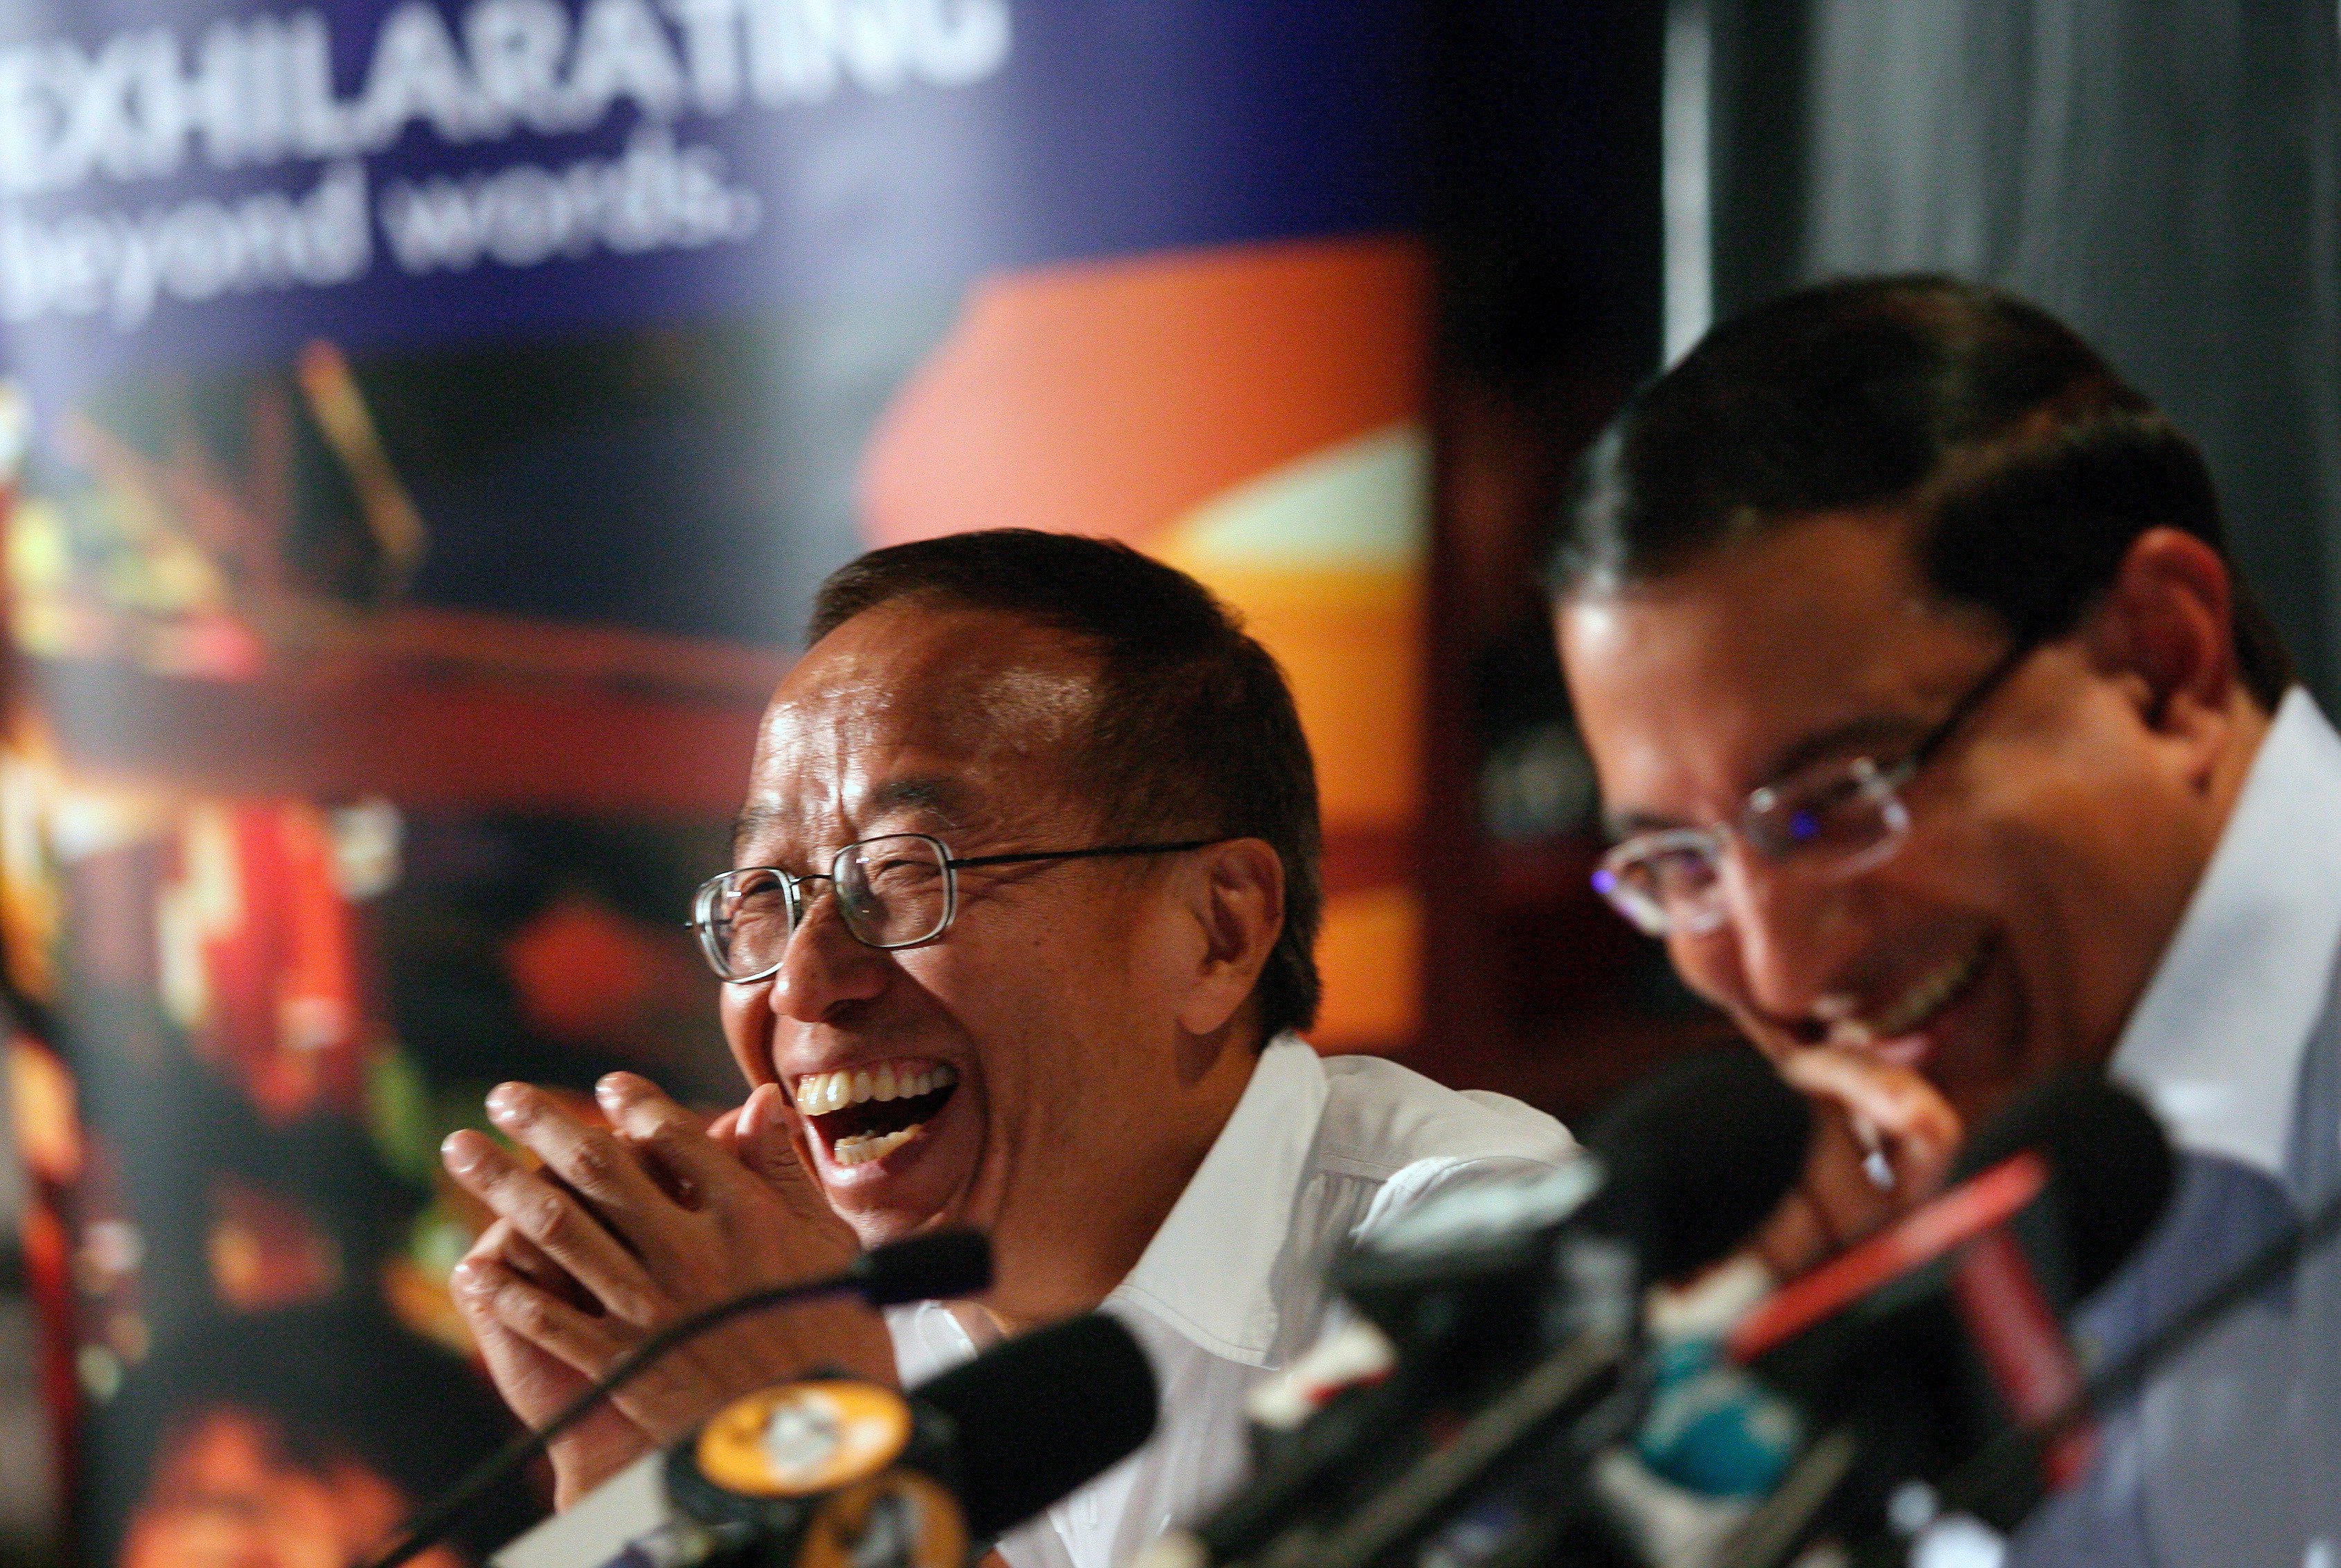 Billionaire Ong Beng Seng (left) and Singapore minister S Iswaran in 2007. Photo: EPA-EFE